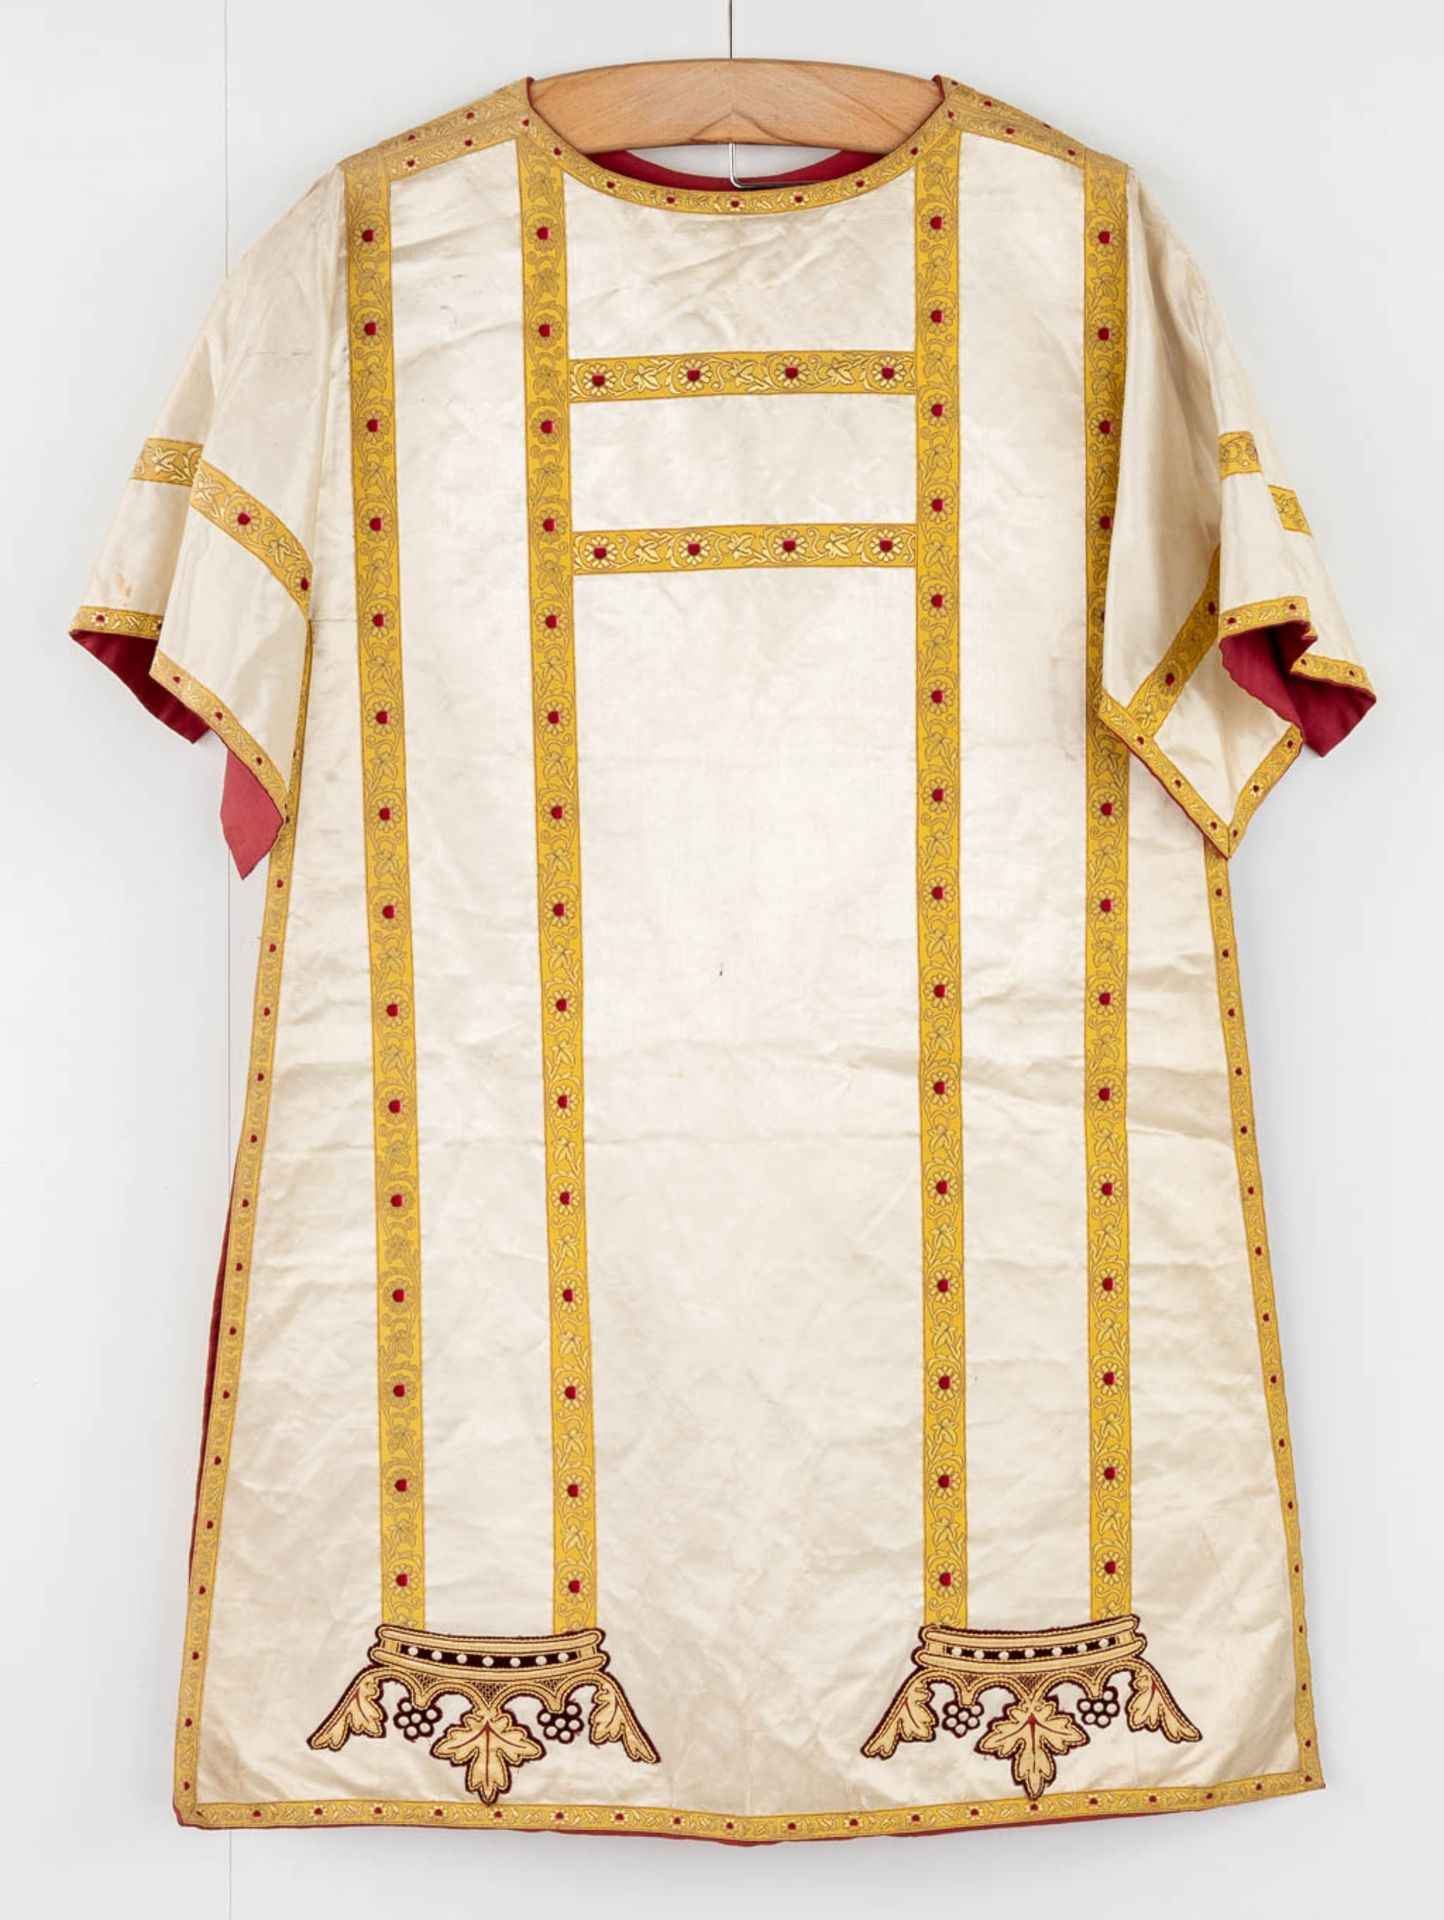 Four Dalmatics, Two Roman Chasubles, A stola and Chalice Veil, finished with embroideries. - Image 21 of 59